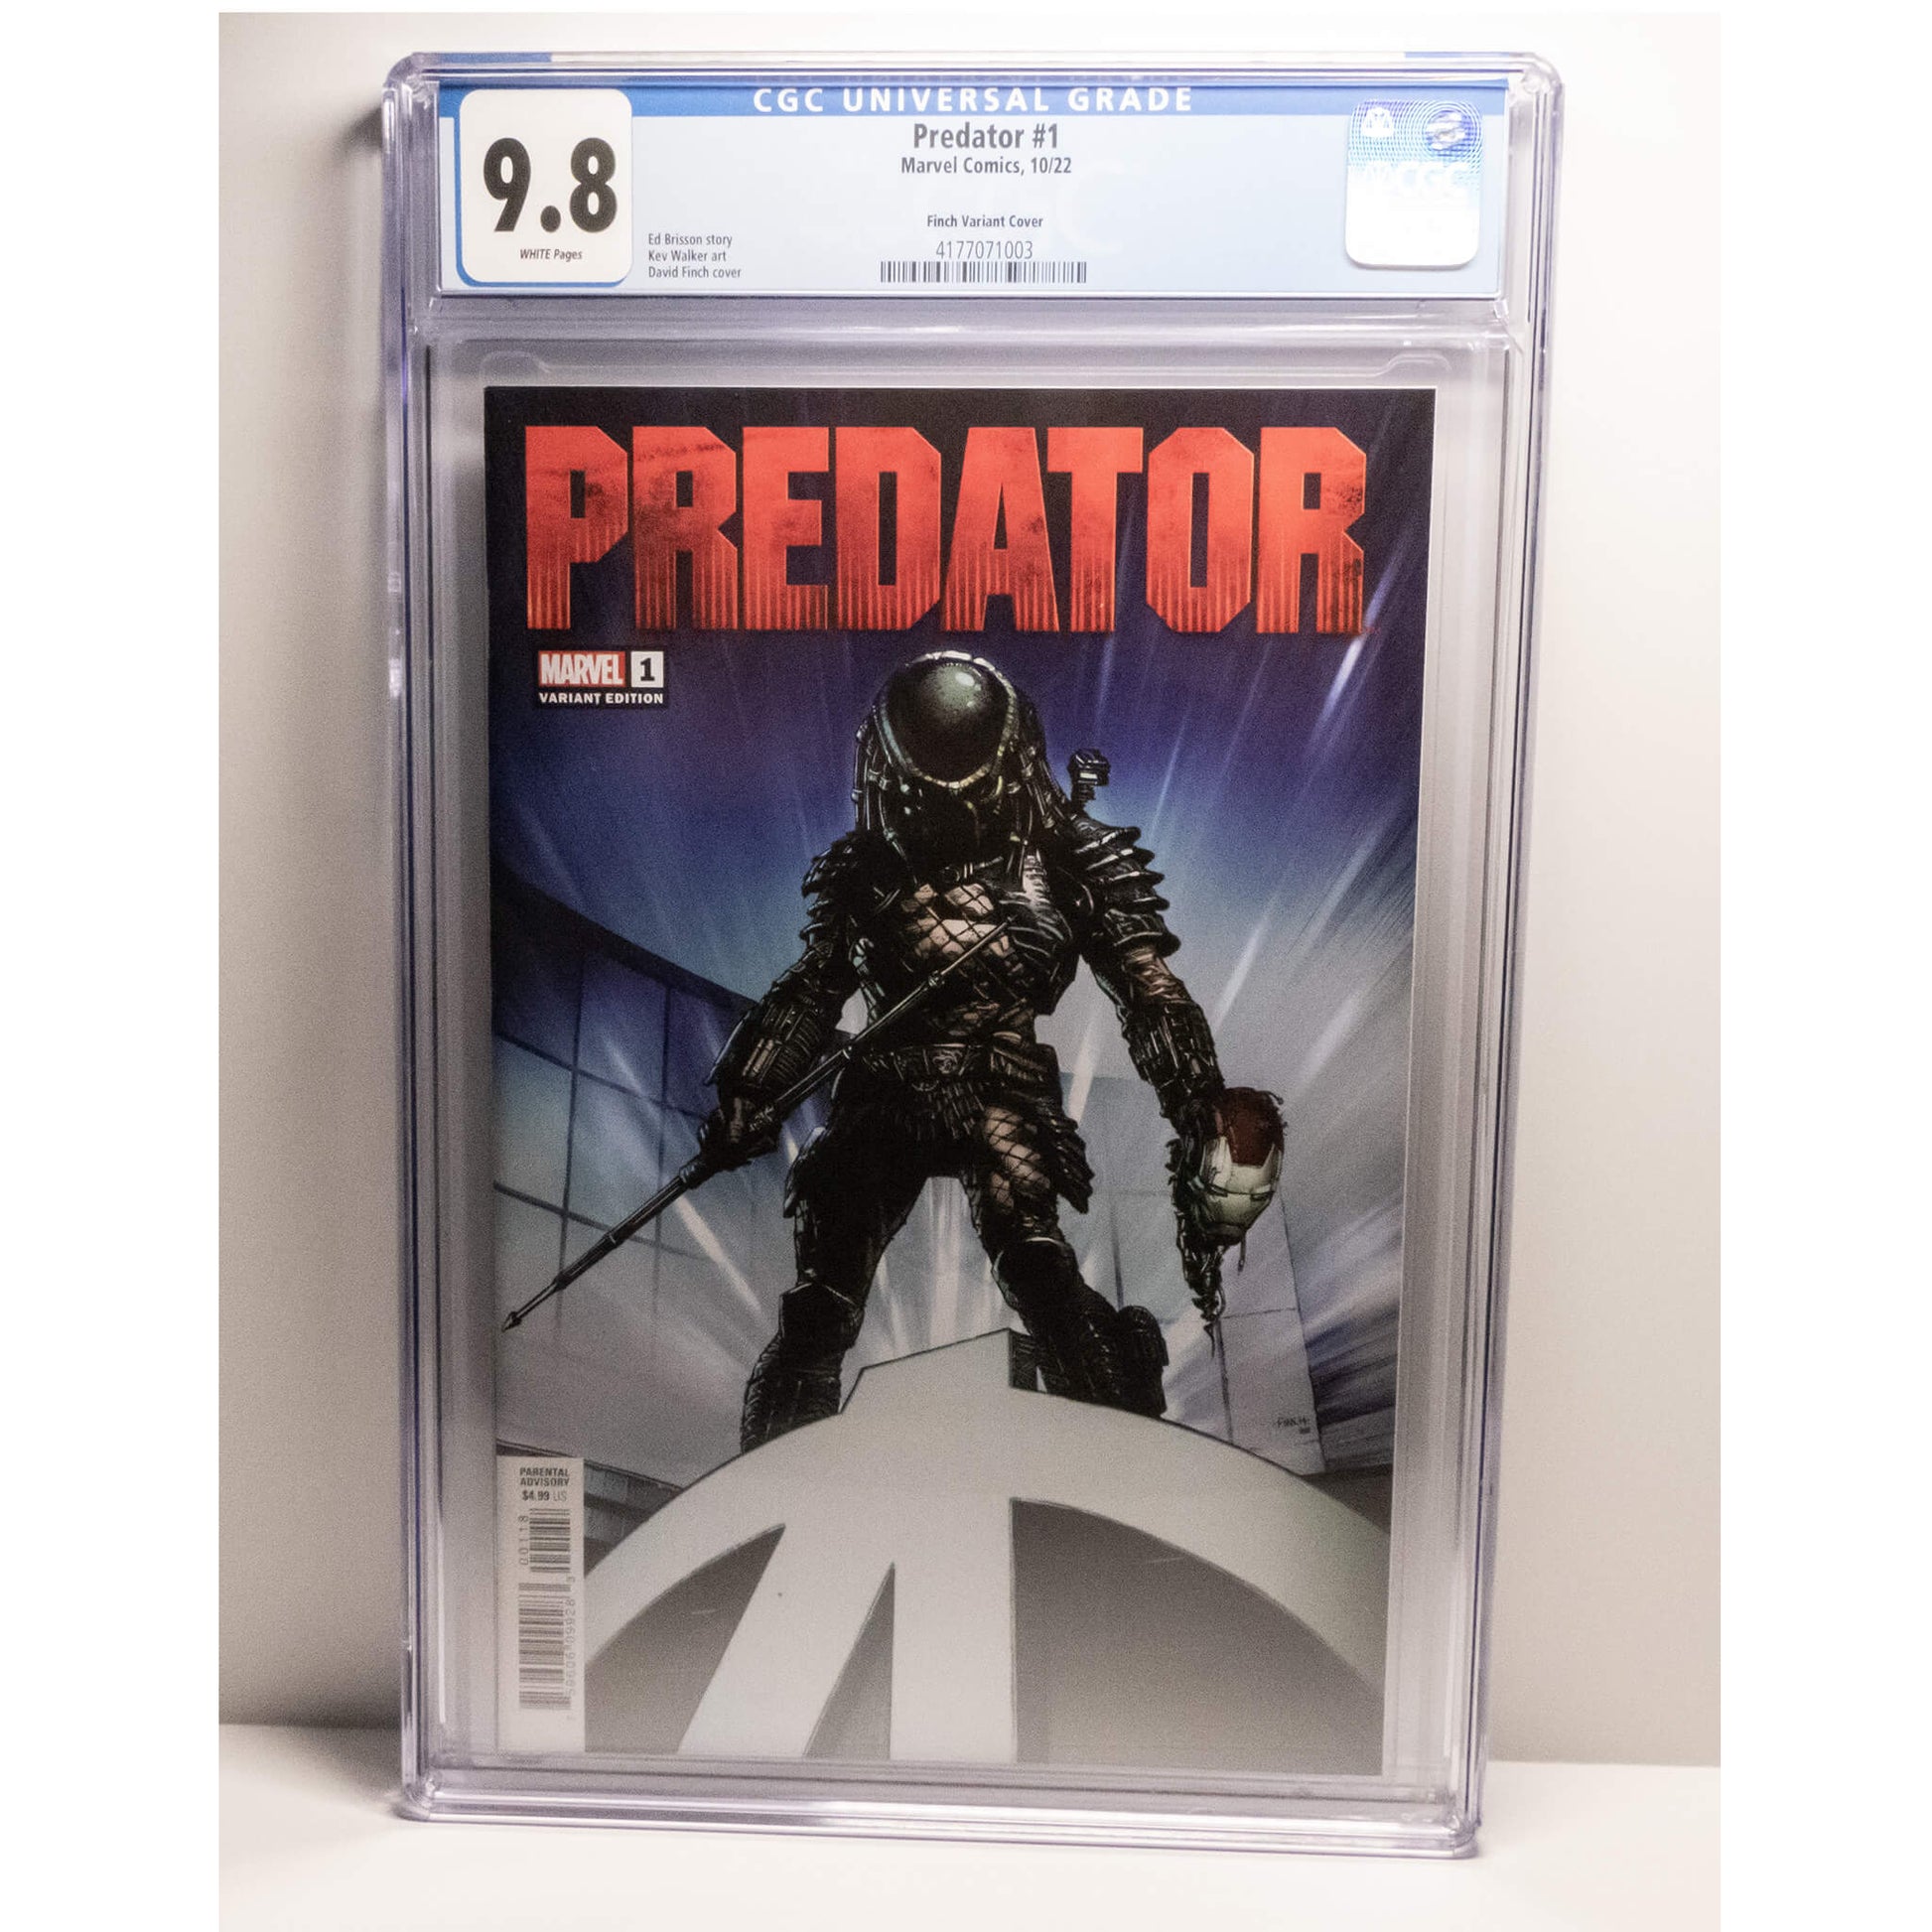 Predator #1 CGC 9.8 at End of Earth One